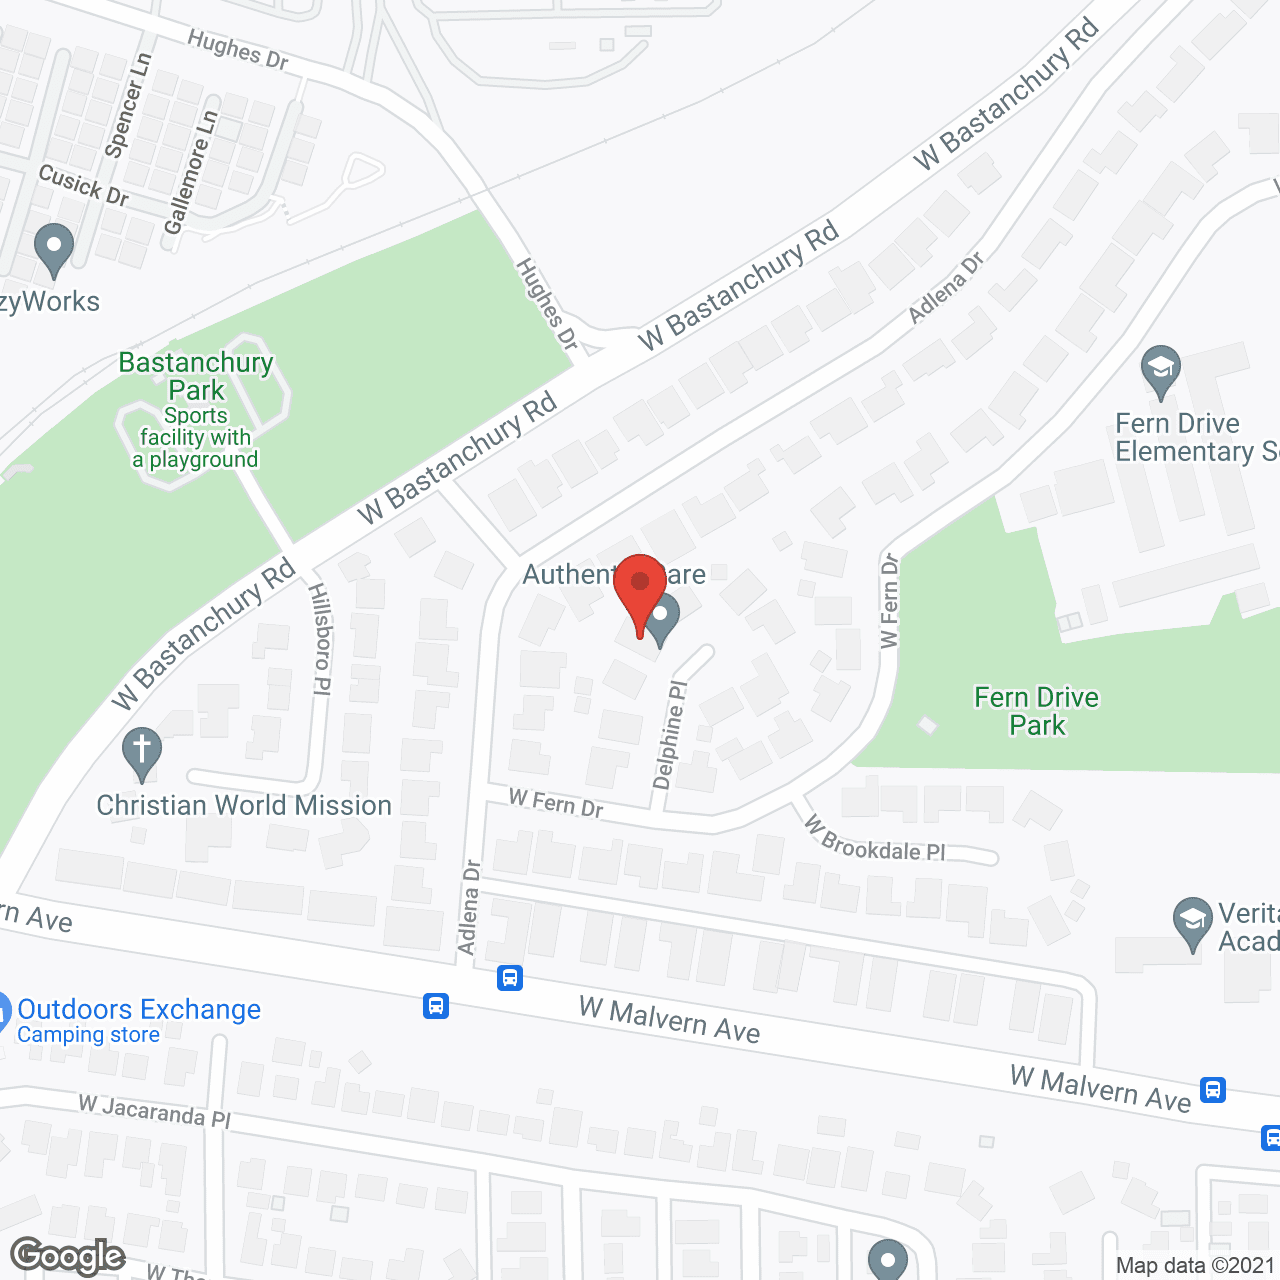 A1 Residential Care Facility for the Elderly @ Delphine in google map